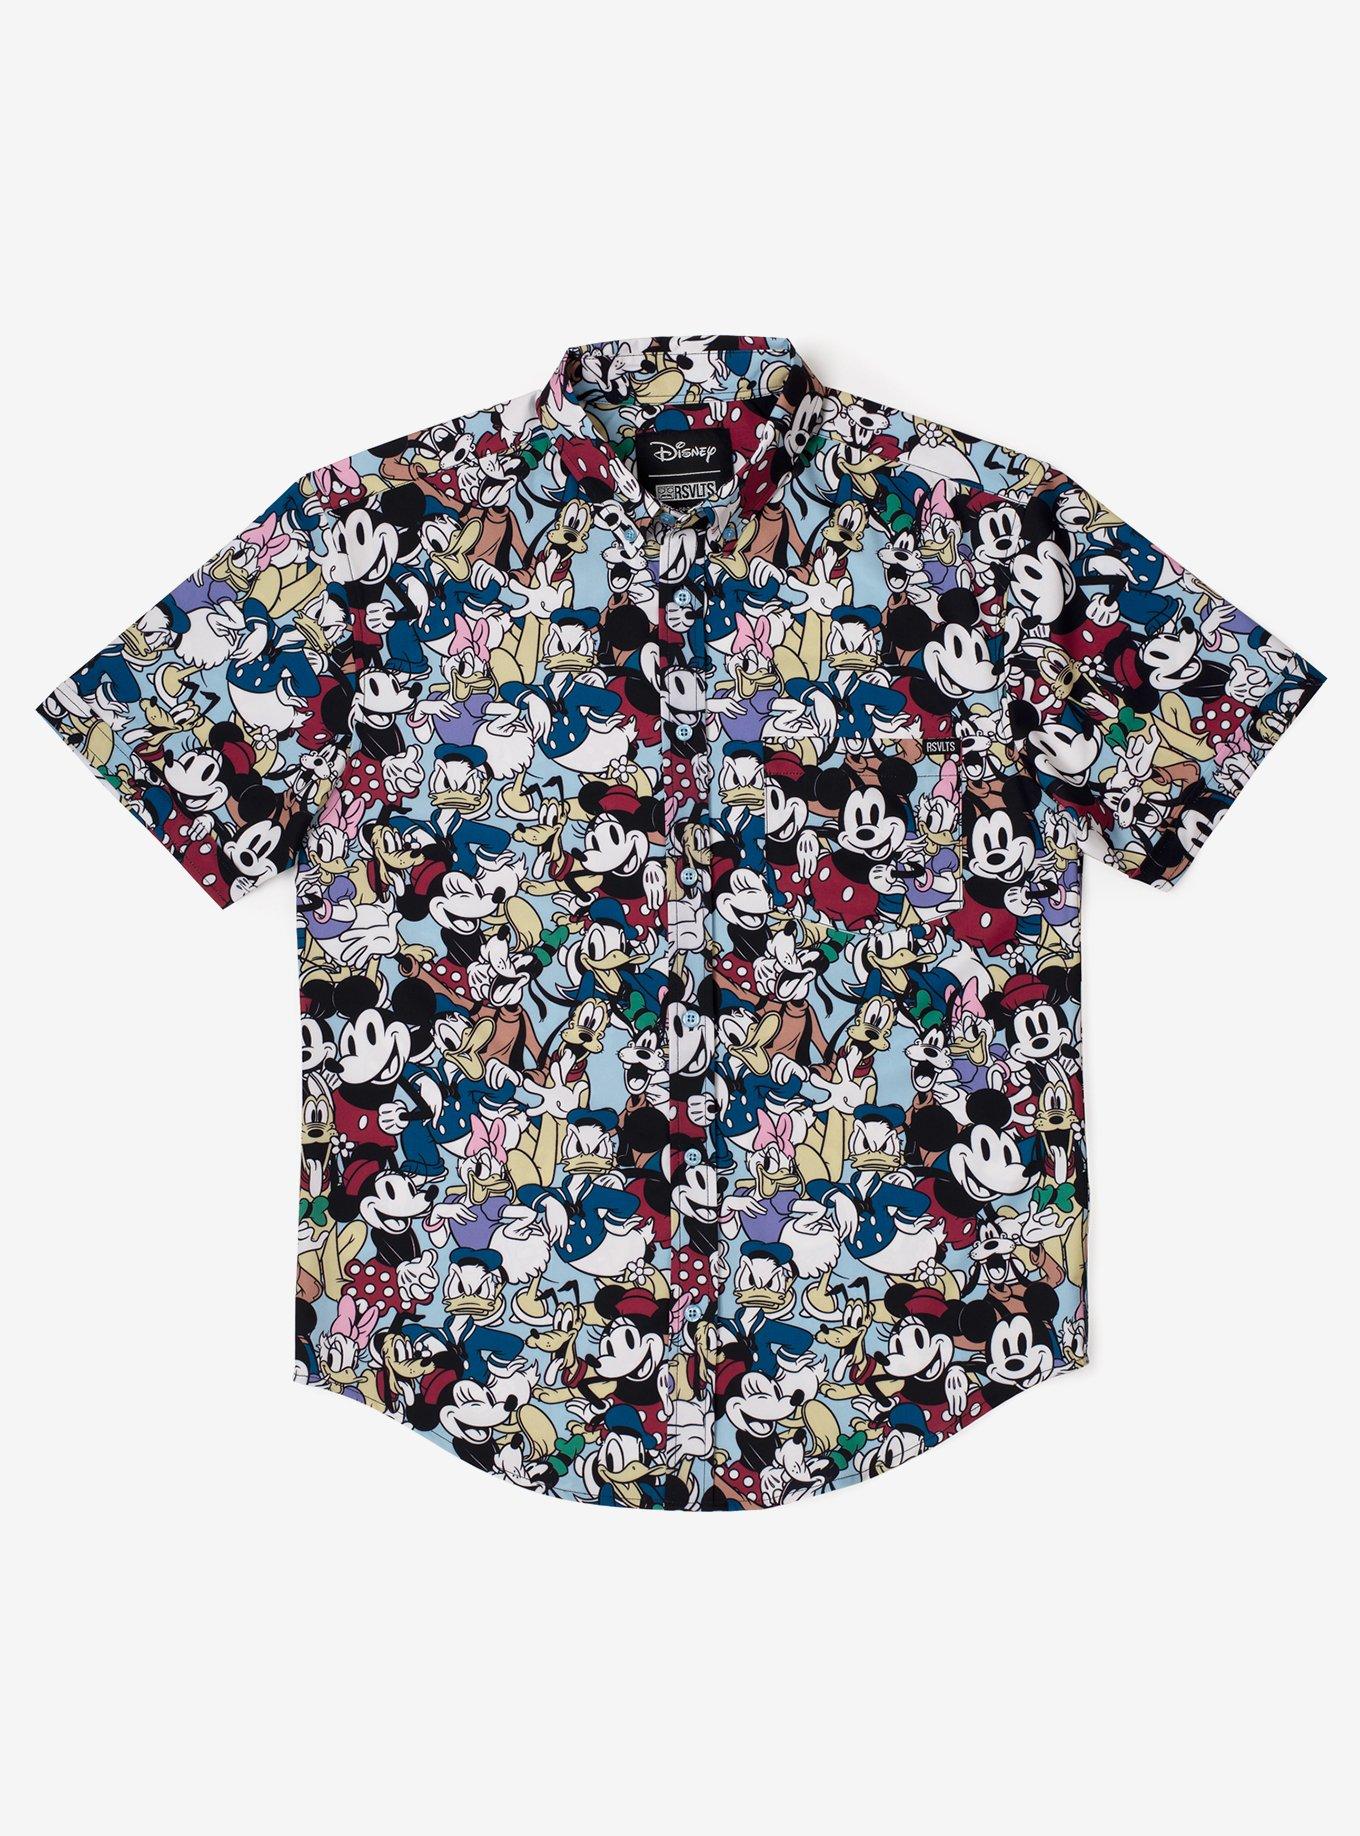 Disney100 x RSVLTS "The Gang's All Here" Button-Up Shirt, MULTI, hi-res